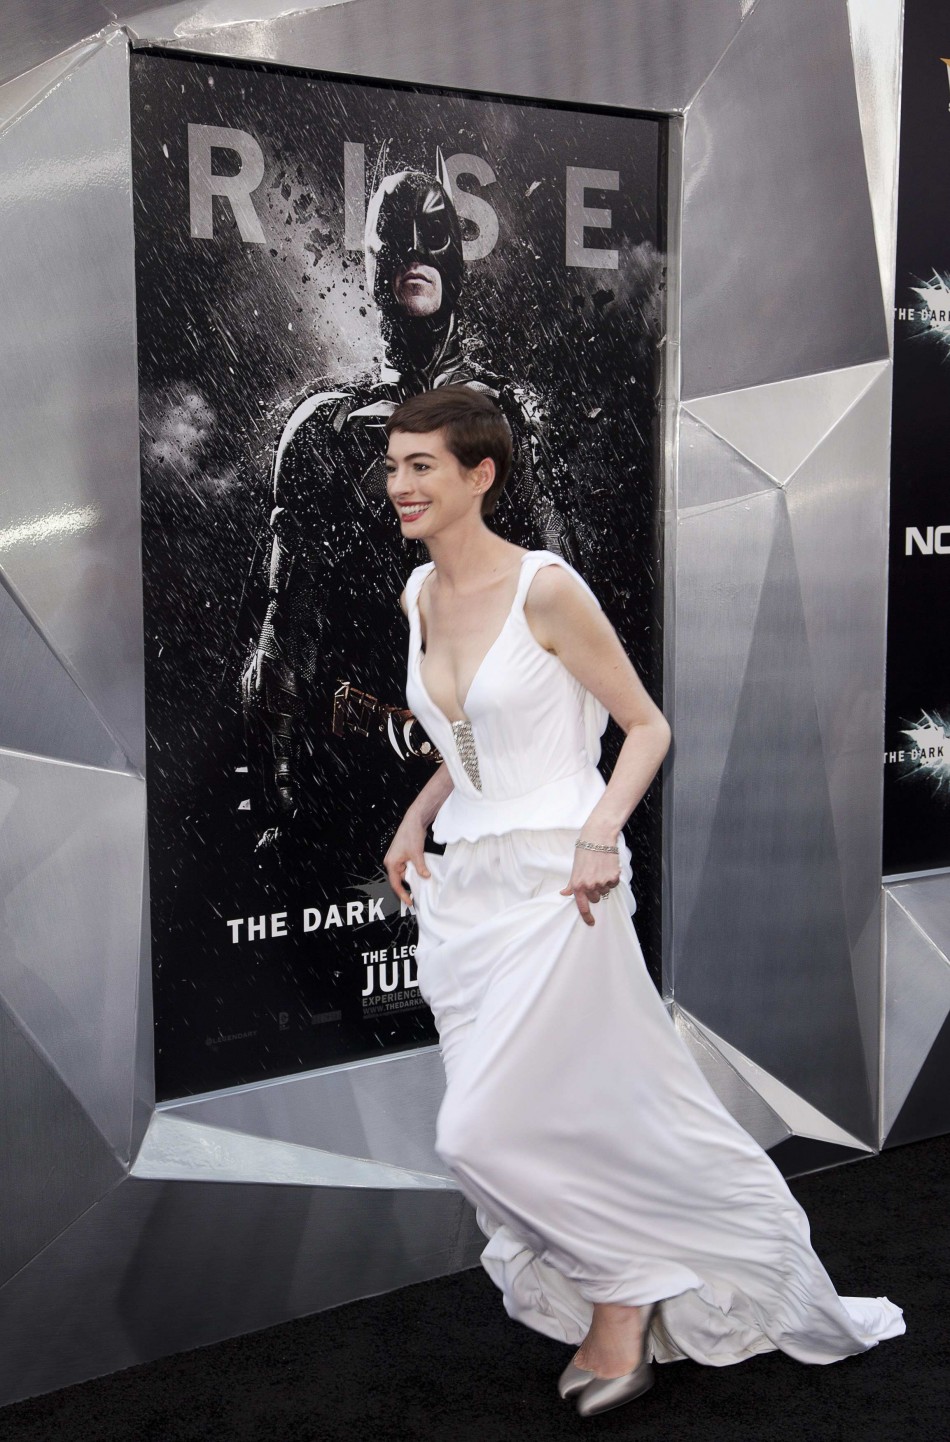 Cast member Anne Hathaway attends the world premiere of the movie quotThe Dark Knight Risesquot in New York